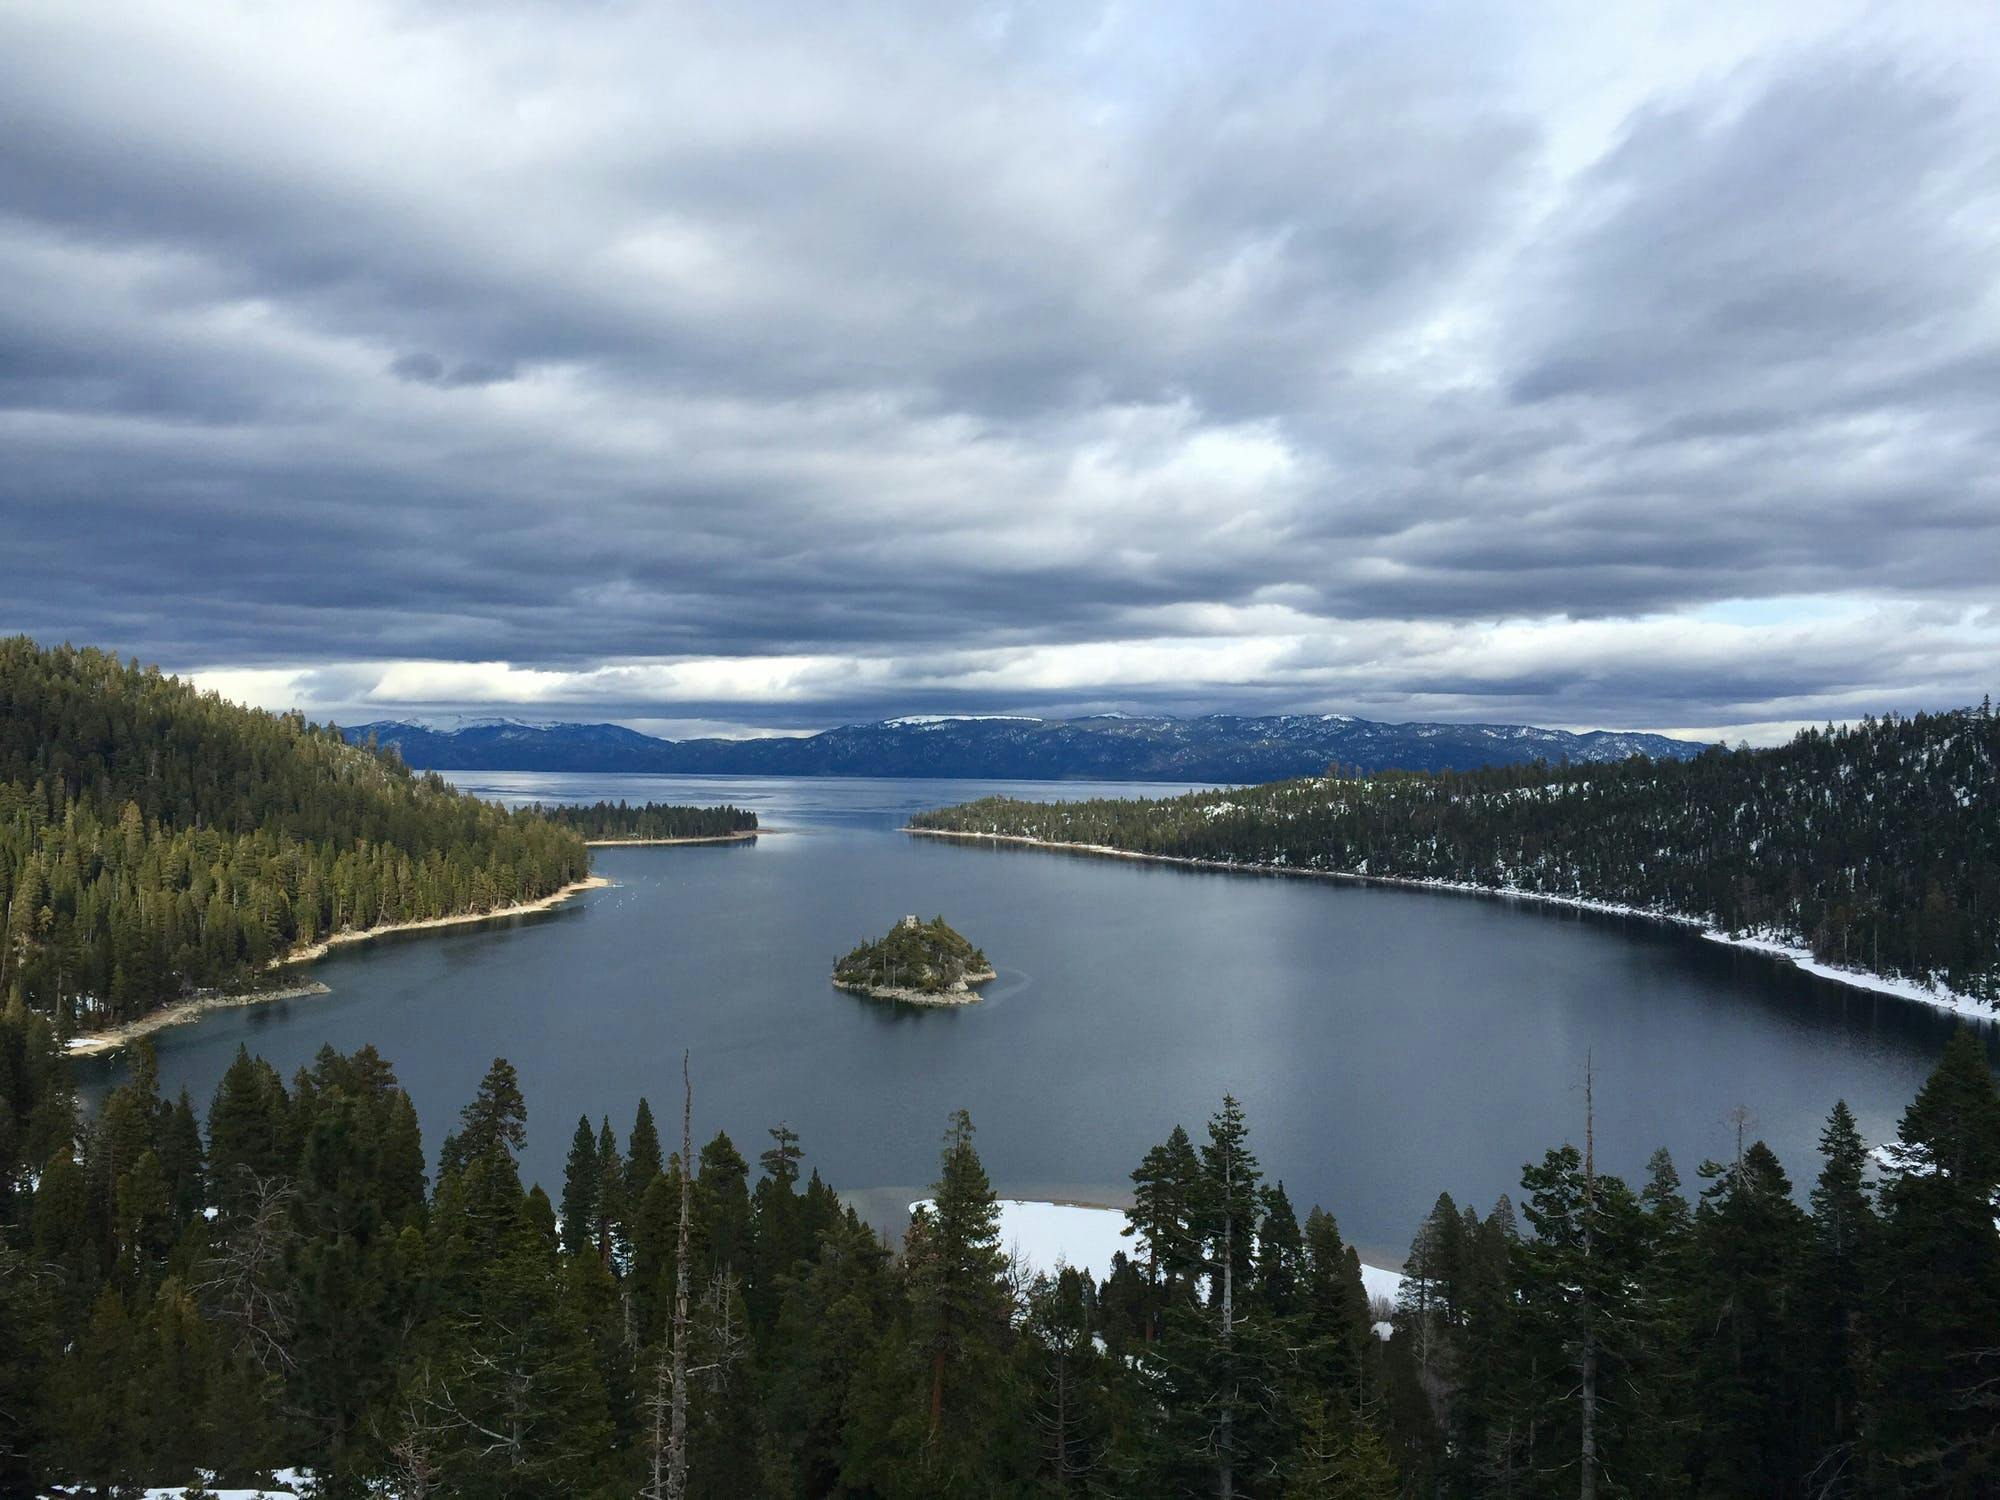 A view of Lake Tahoe with trees on the banks and a small island in the middle